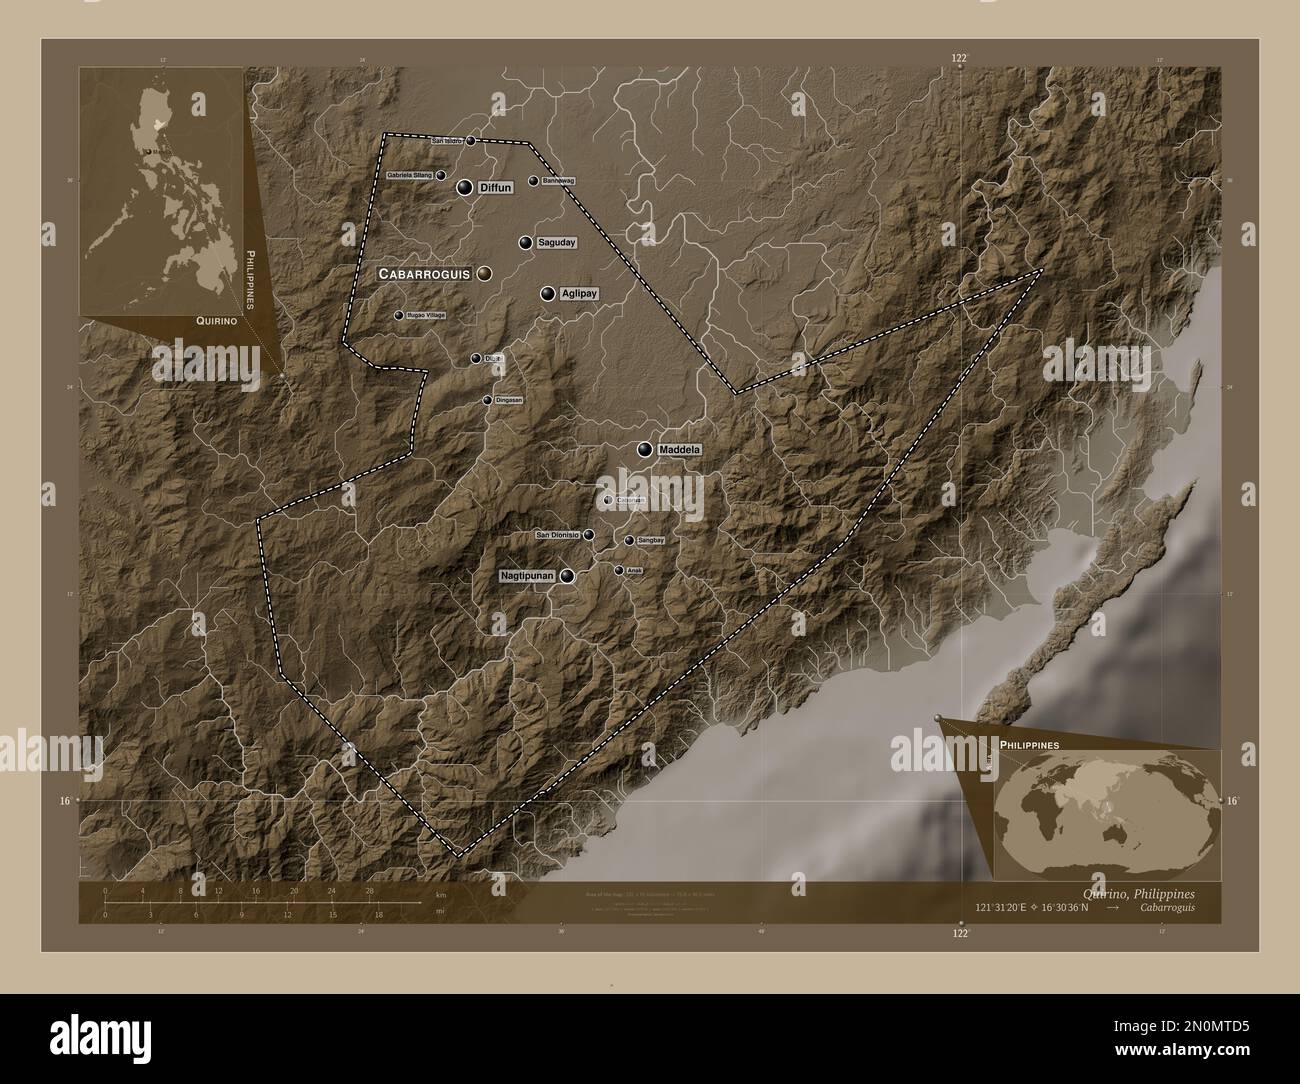 Quirino, province of Philippines. Elevation map colored in sepia tones with lakes and rivers. Locations and names of major cities of the region. Corne Stock Photo